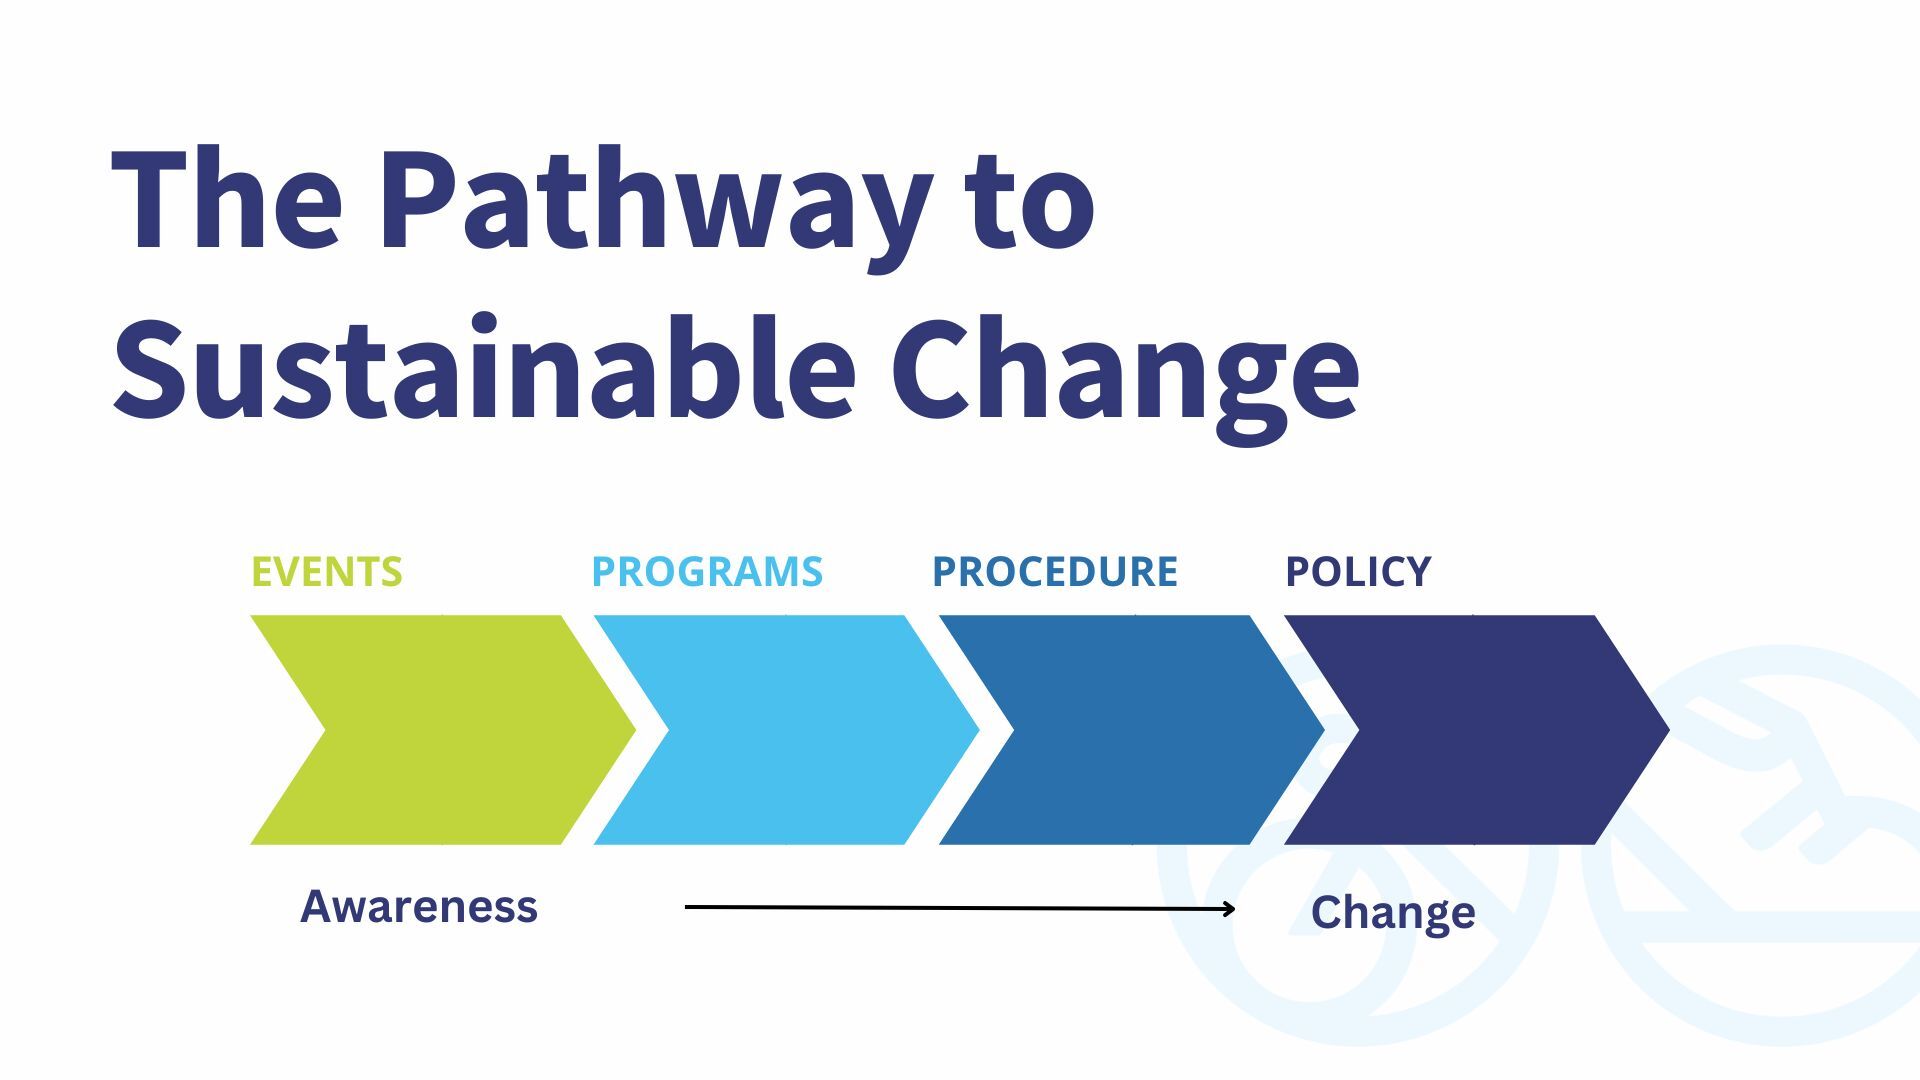 the pathway to sustainable change starts with events, moves into programs, then begins establishing procedures, and ends with policy.